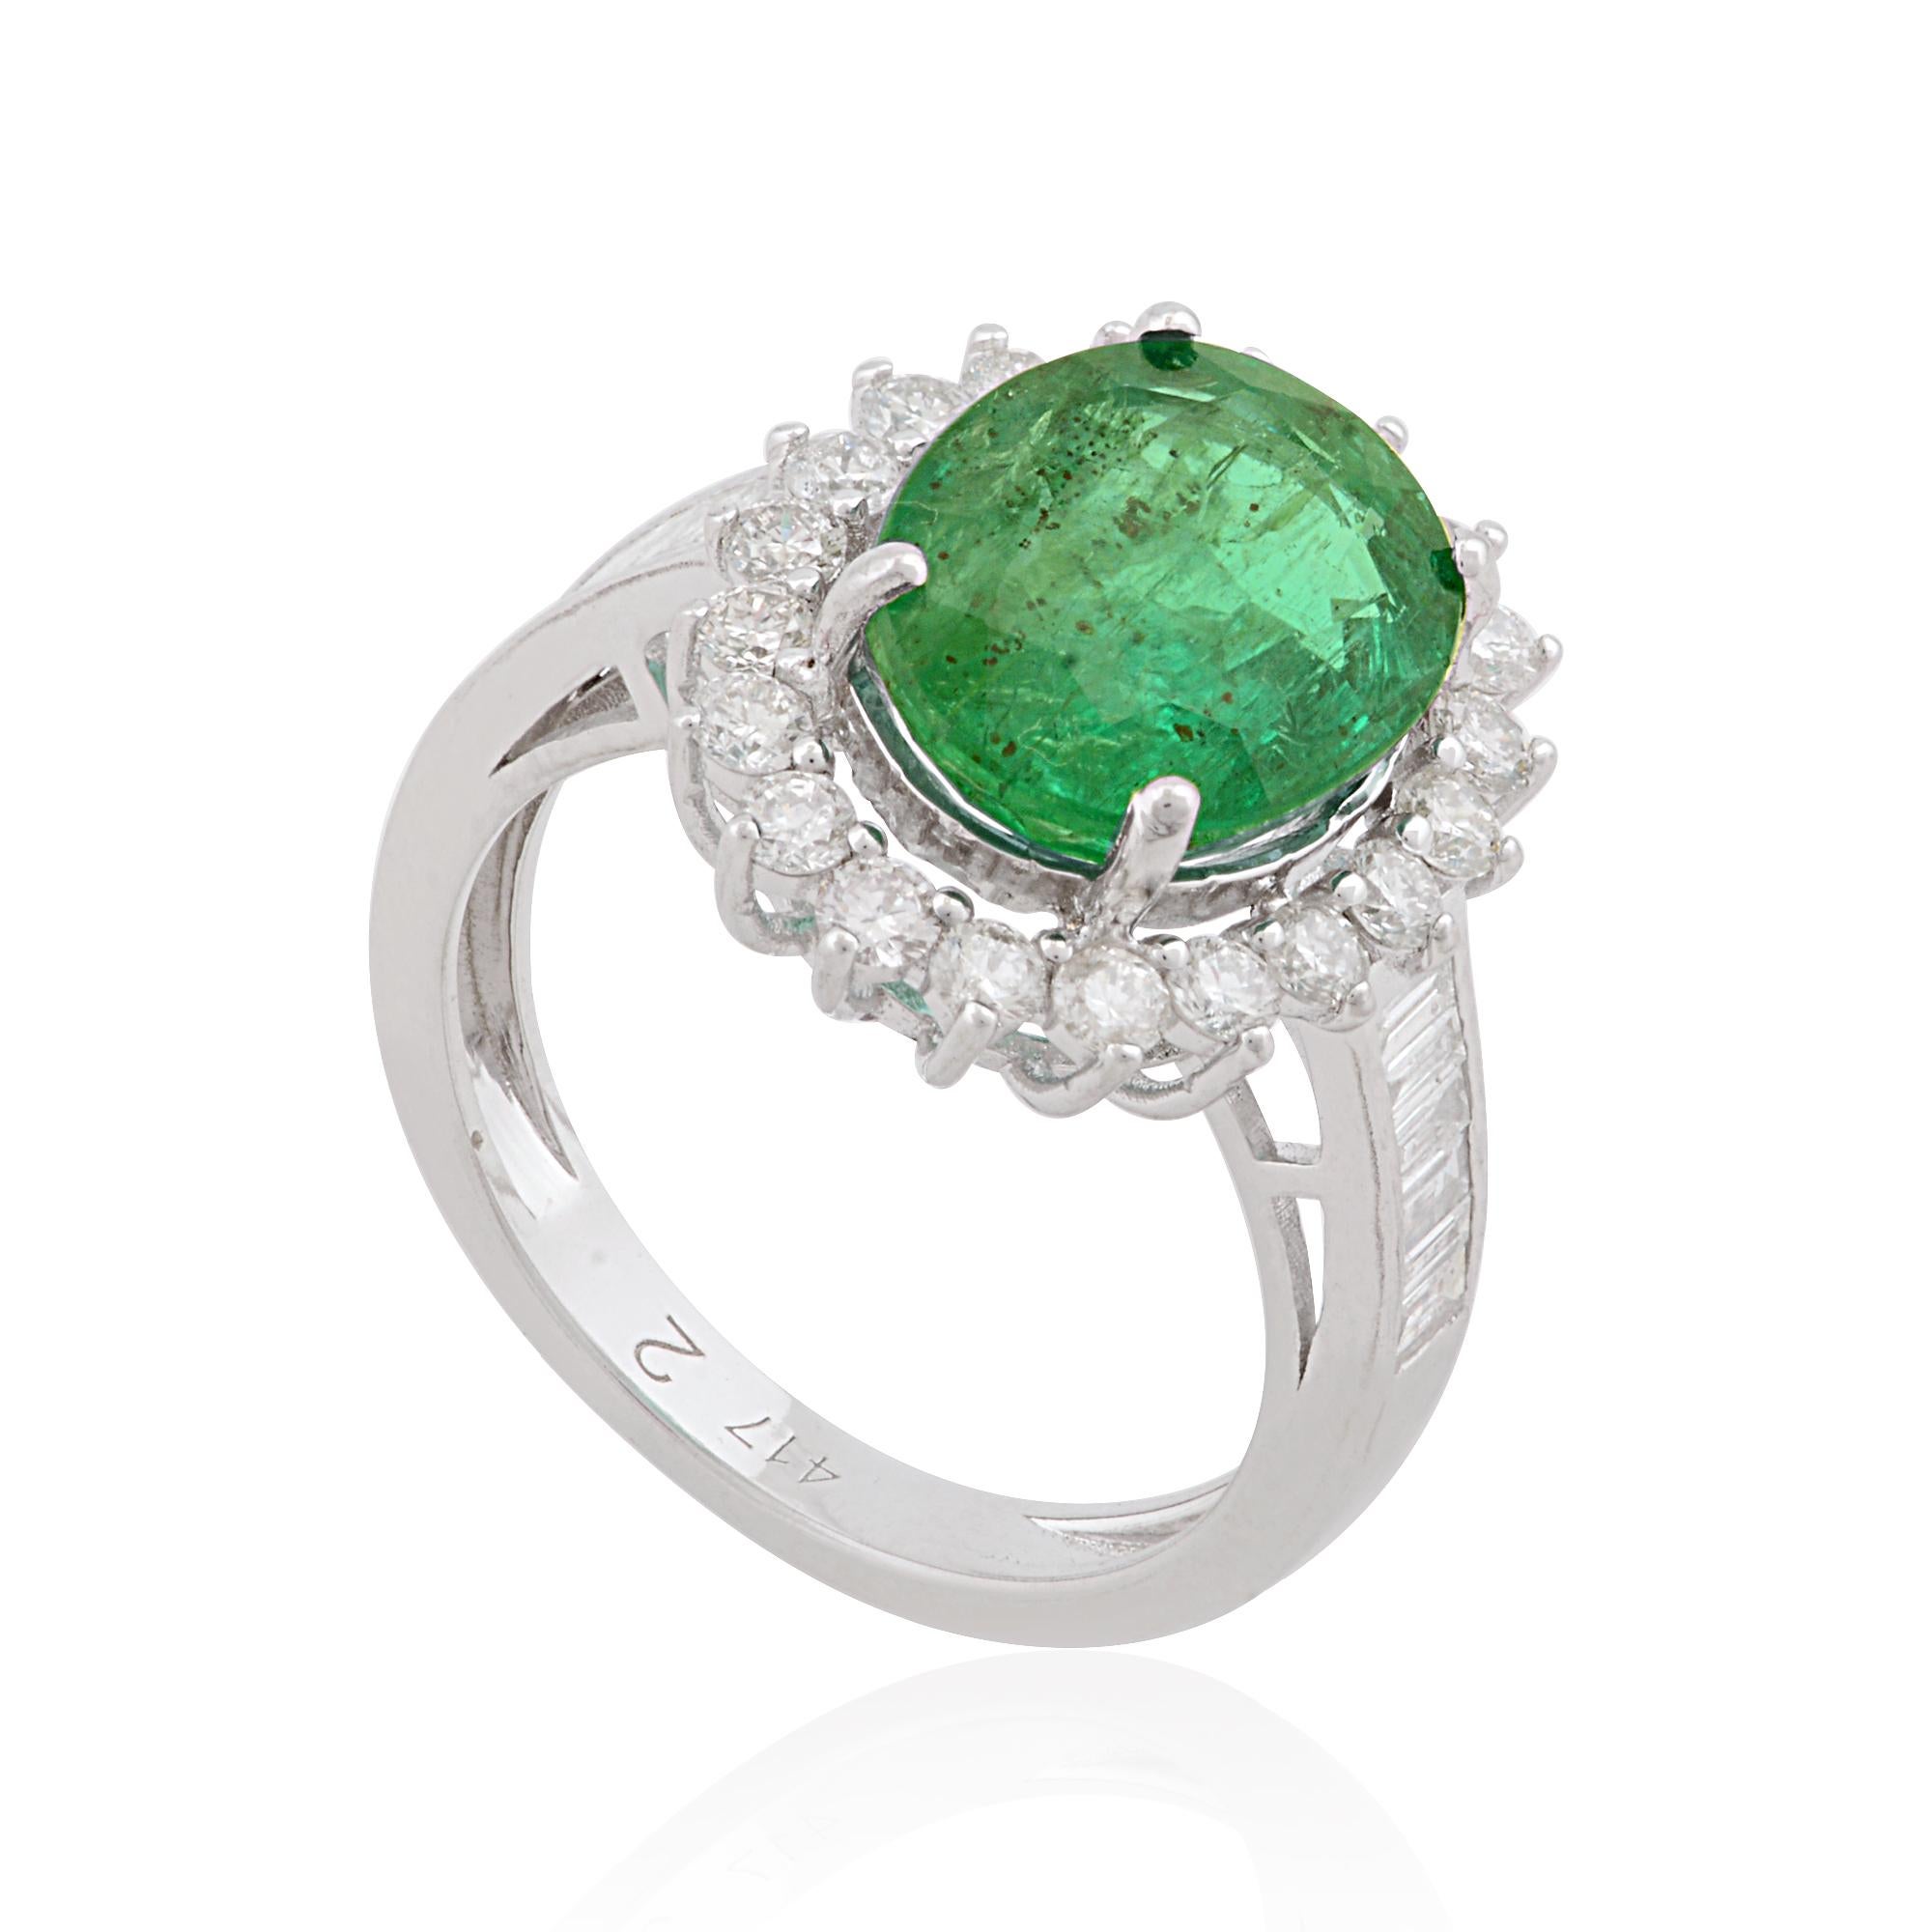 For Sale:  Oval Natural Emerald Gemstone Cocktail Ring Diamond 10 Karat White Gold Jewelry 4